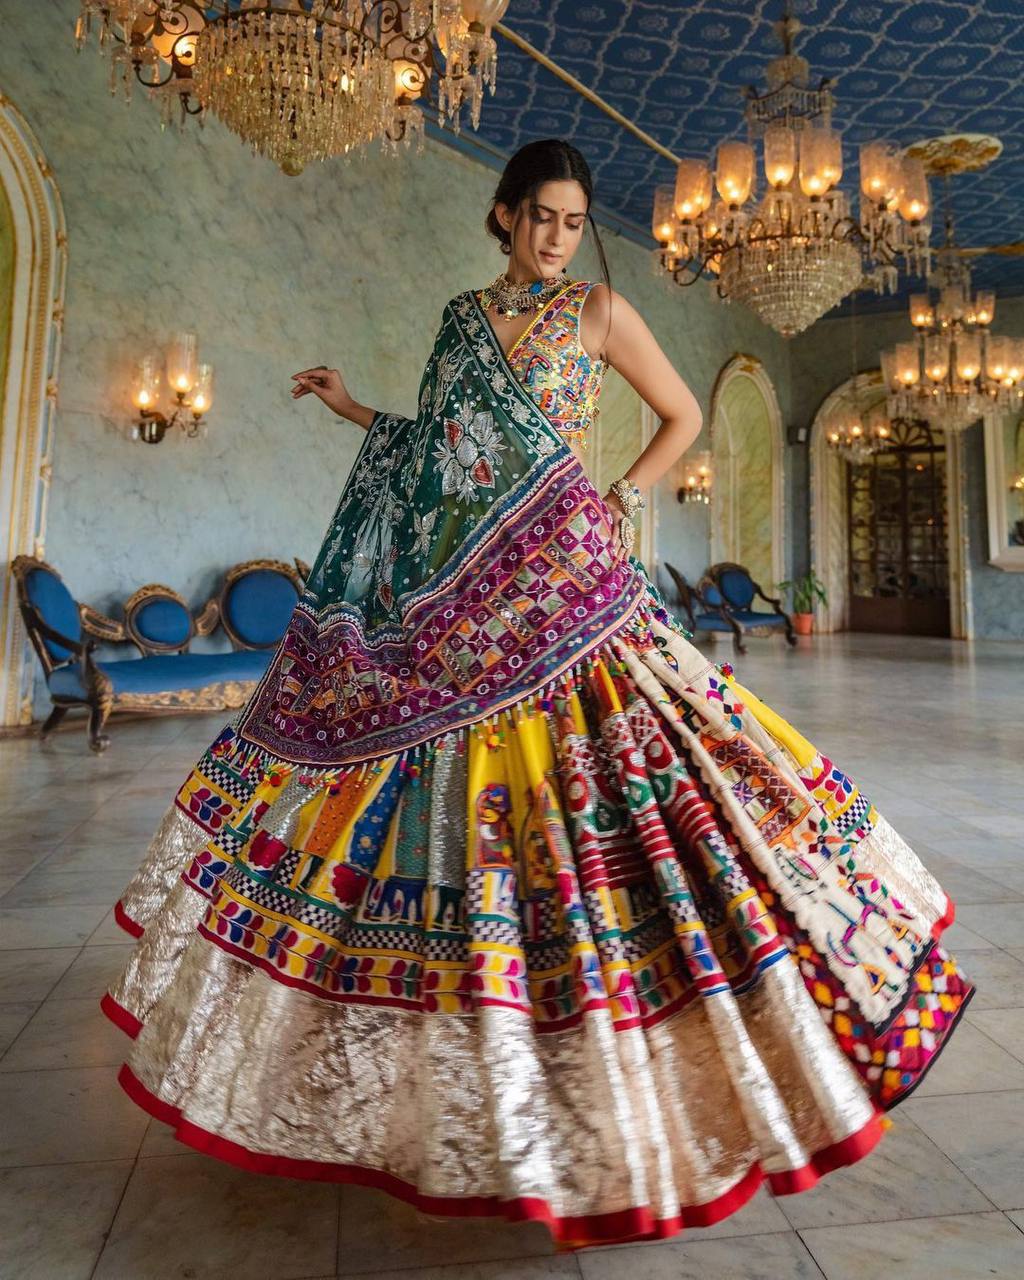 Lehenga Choli Blouse Designs to Give Your Outfit an Edgier Look